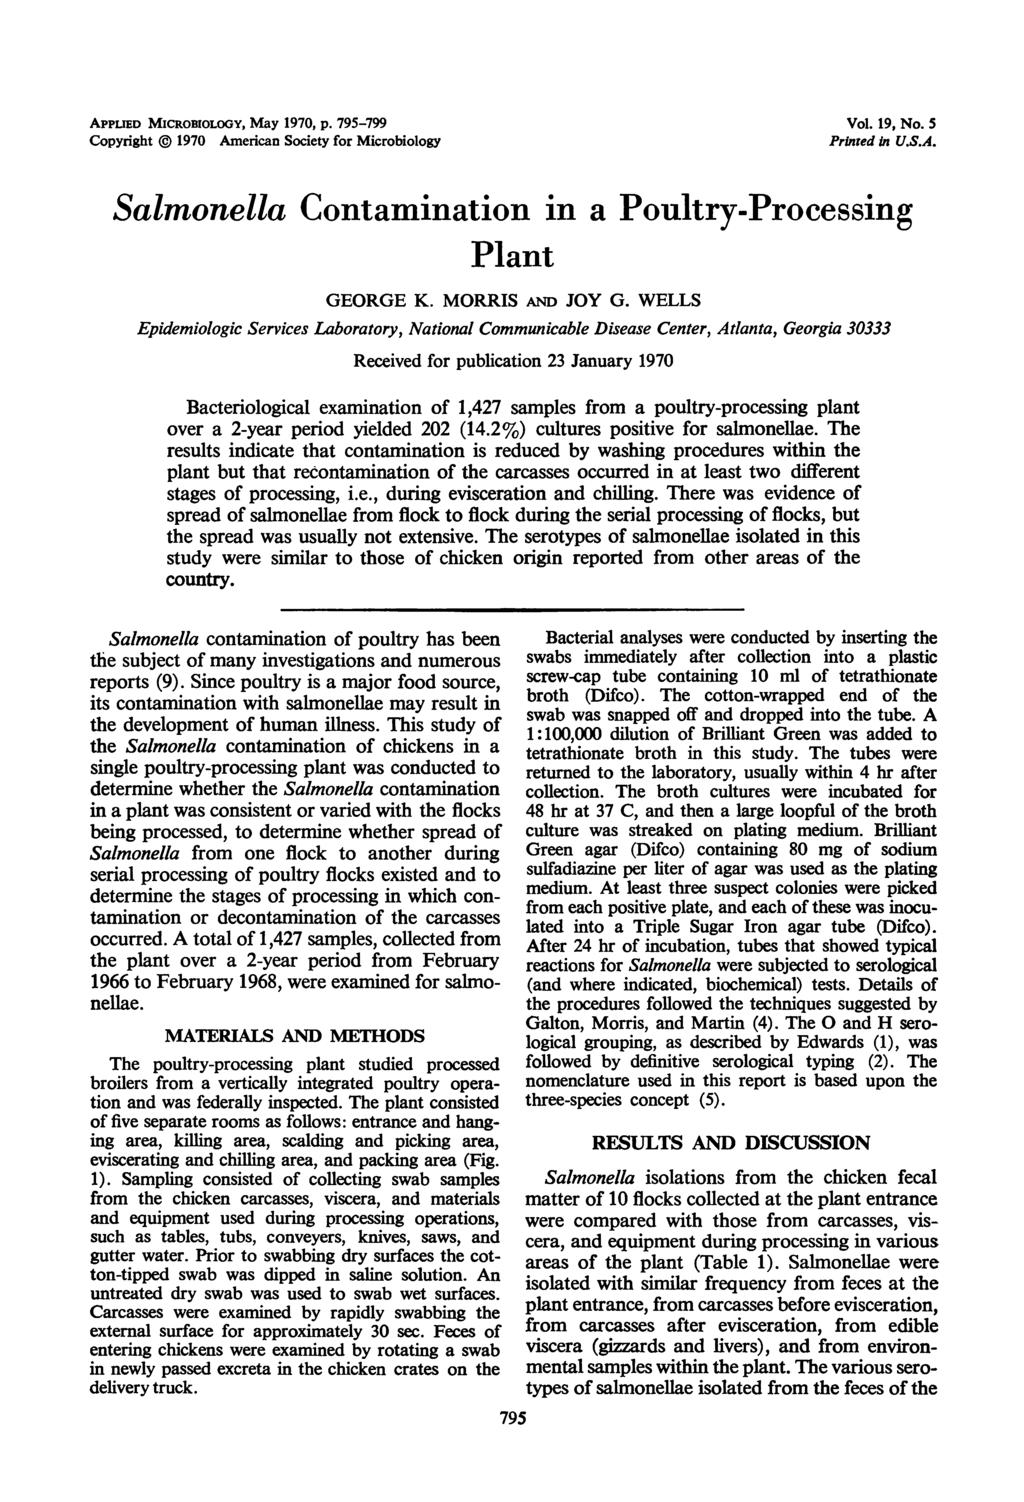 APPLIED MICROBIOLOGY, May 1970, p. 795-799 Copyright 1970 American Society for Microbiology Vol. 19, No. 5 Printed in U.S.A. Salmonella Contamination in a Poultry-Processing Plant GEORGE K.